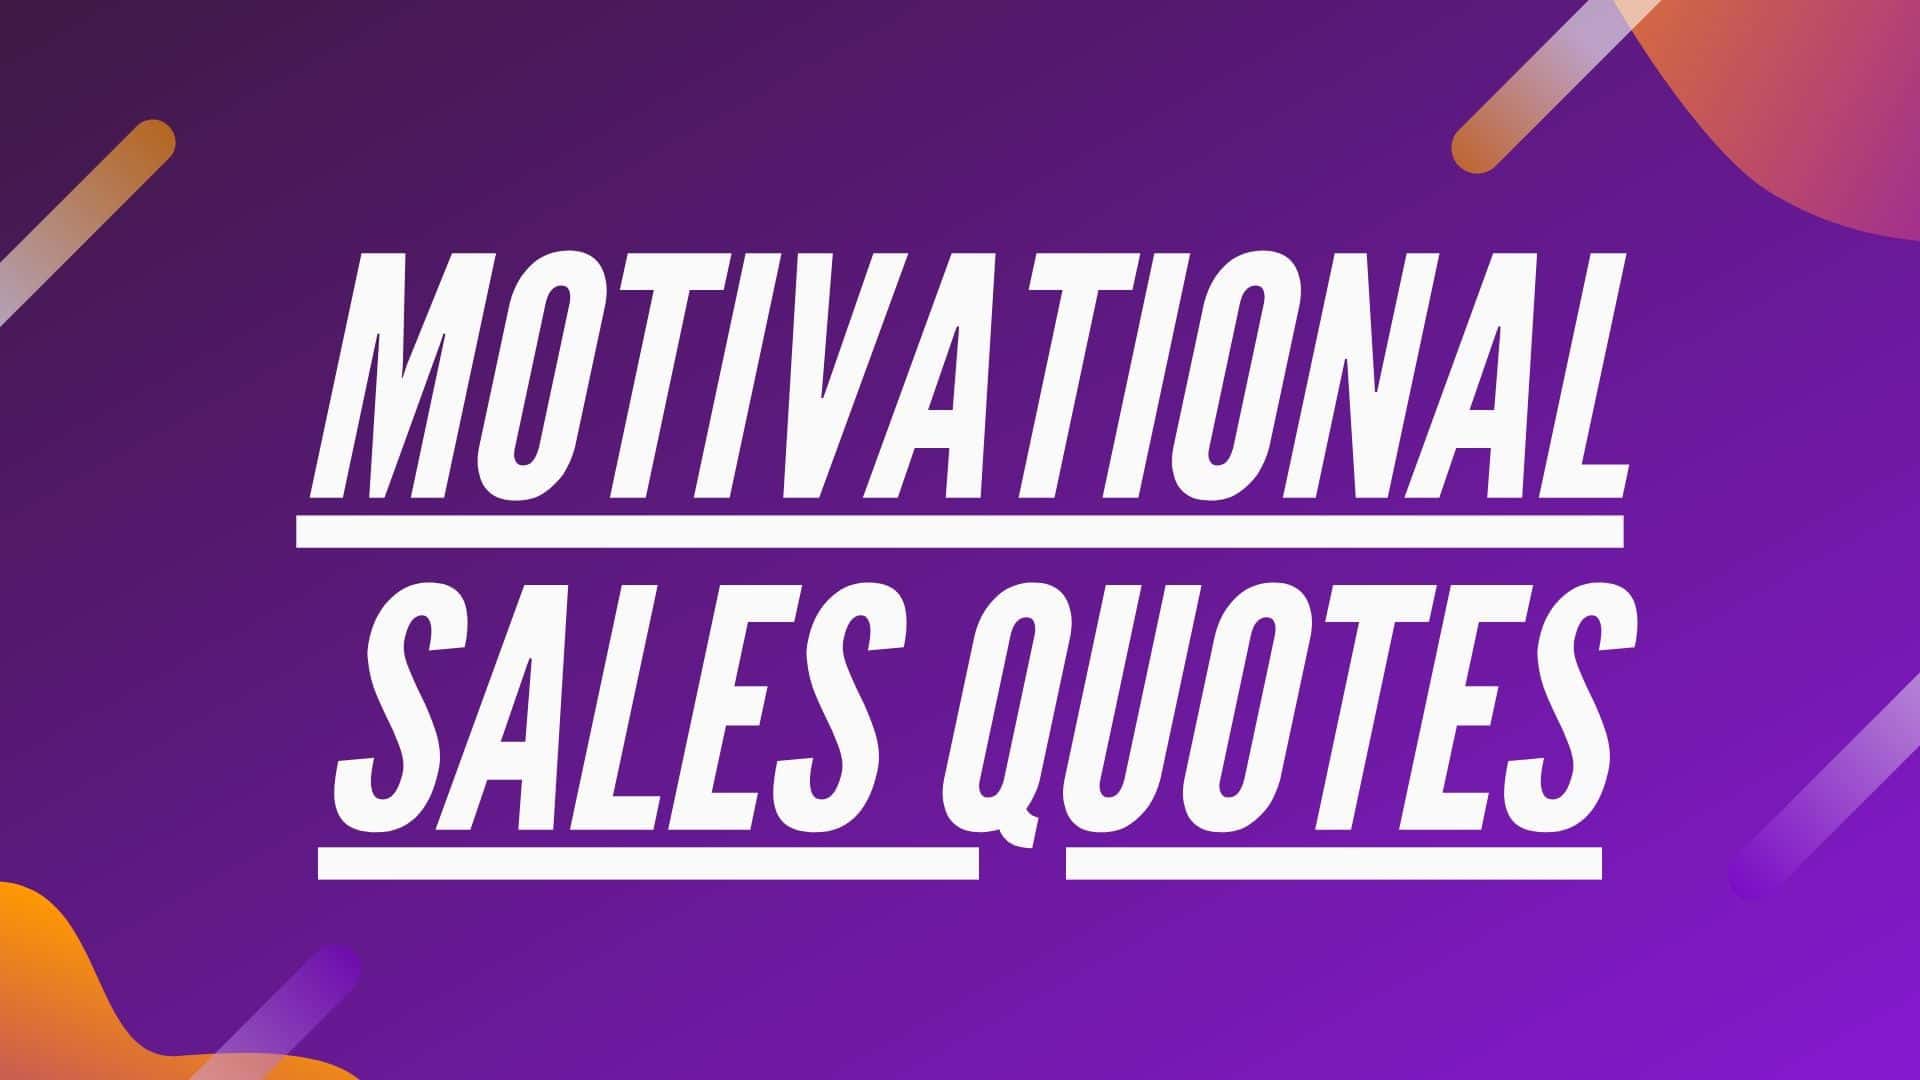 73 Motivational Sales Quotes to empower your team | Marketing91